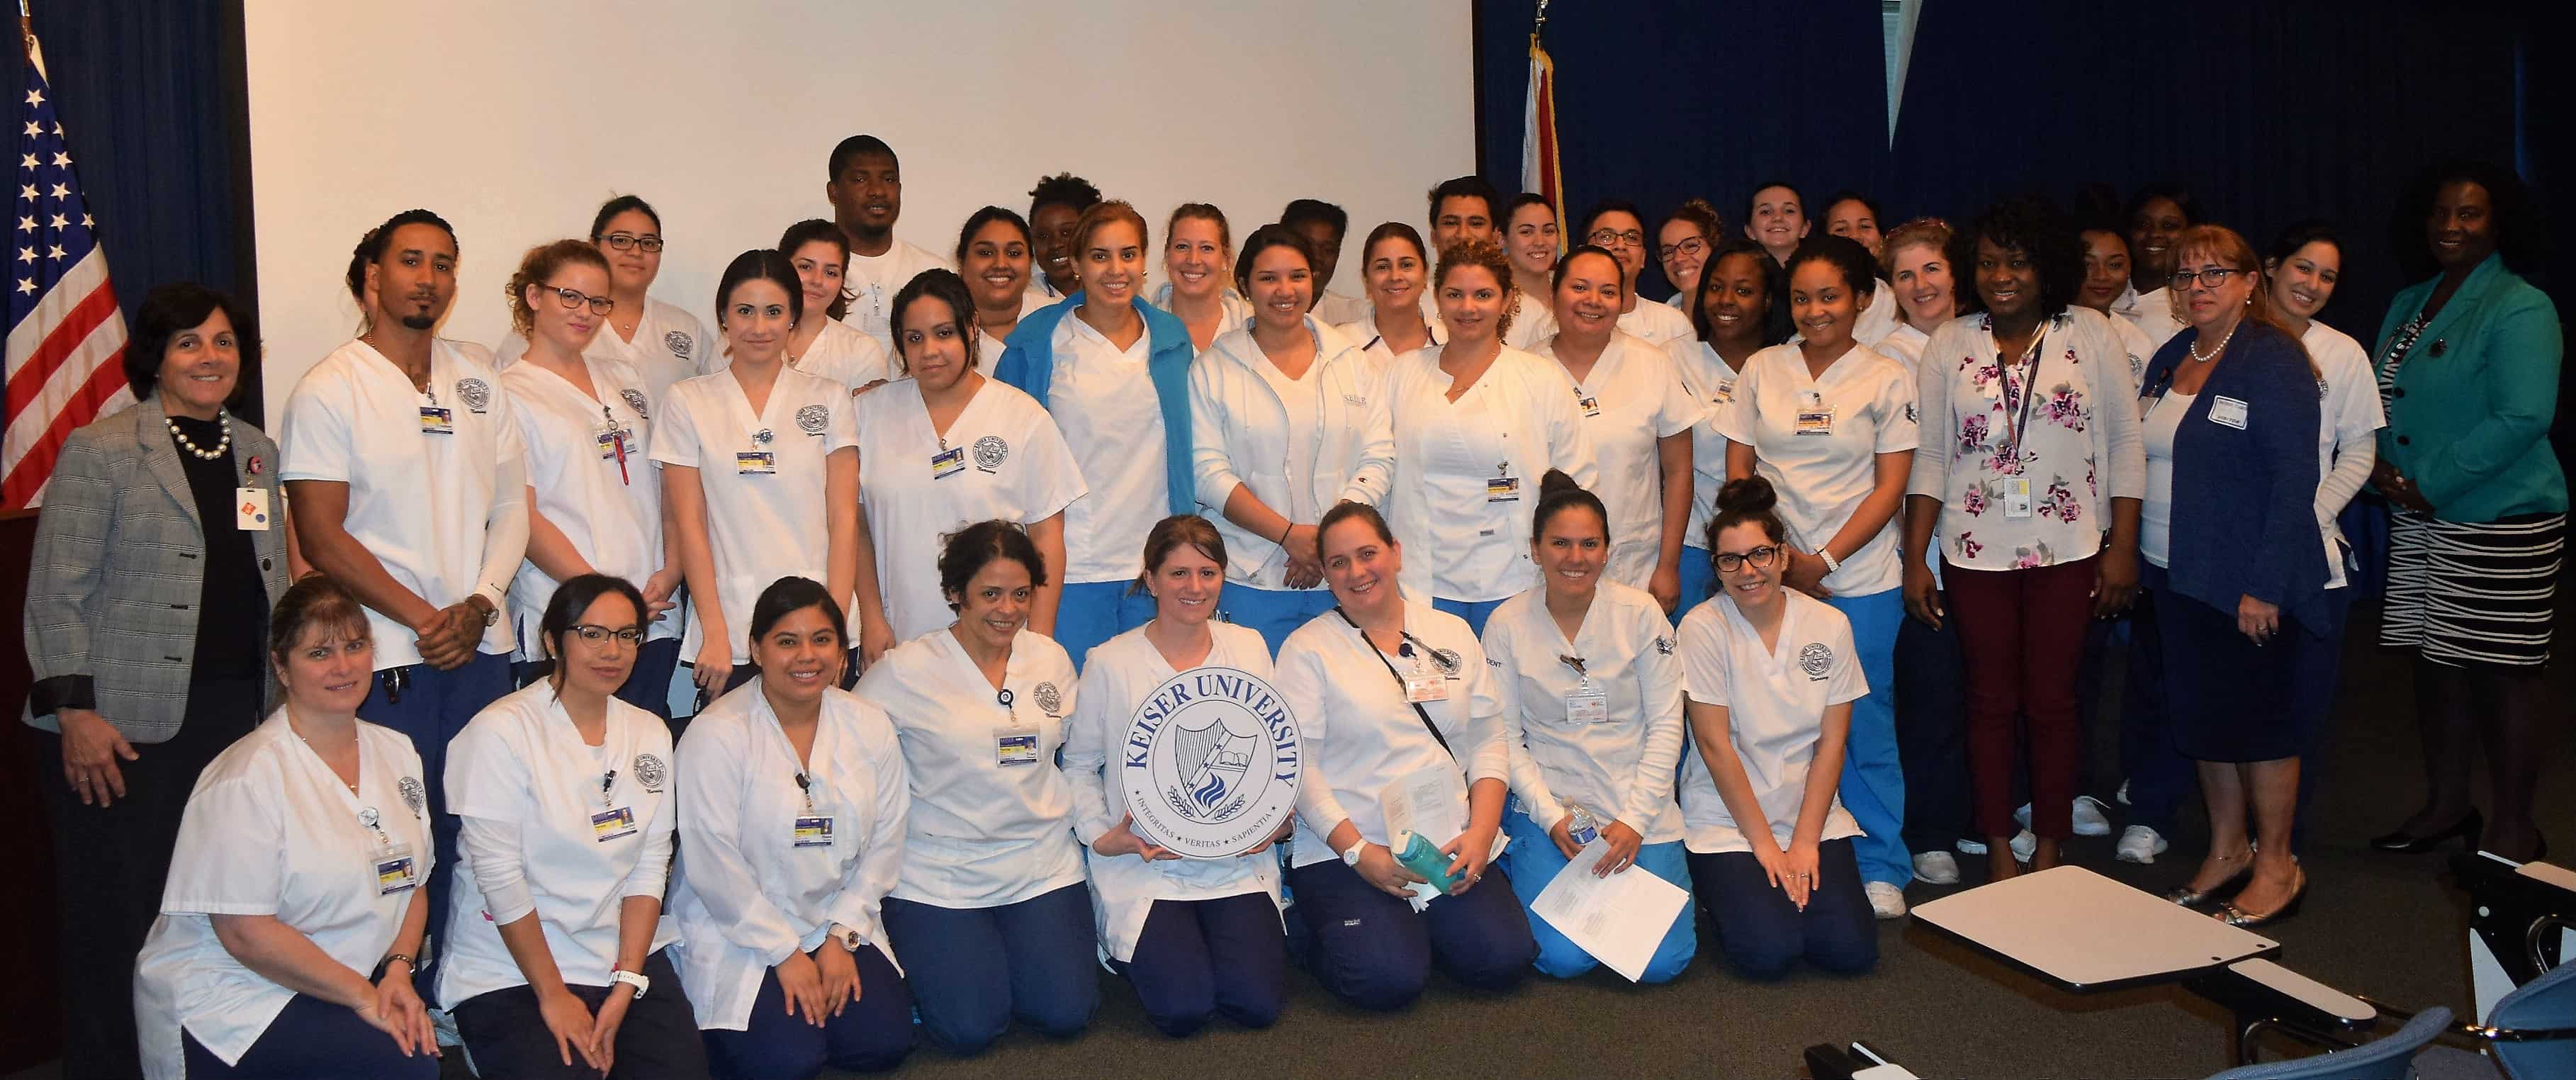 Ft. Lauderdale Nursing Students Receive Presentations from the Department of Health